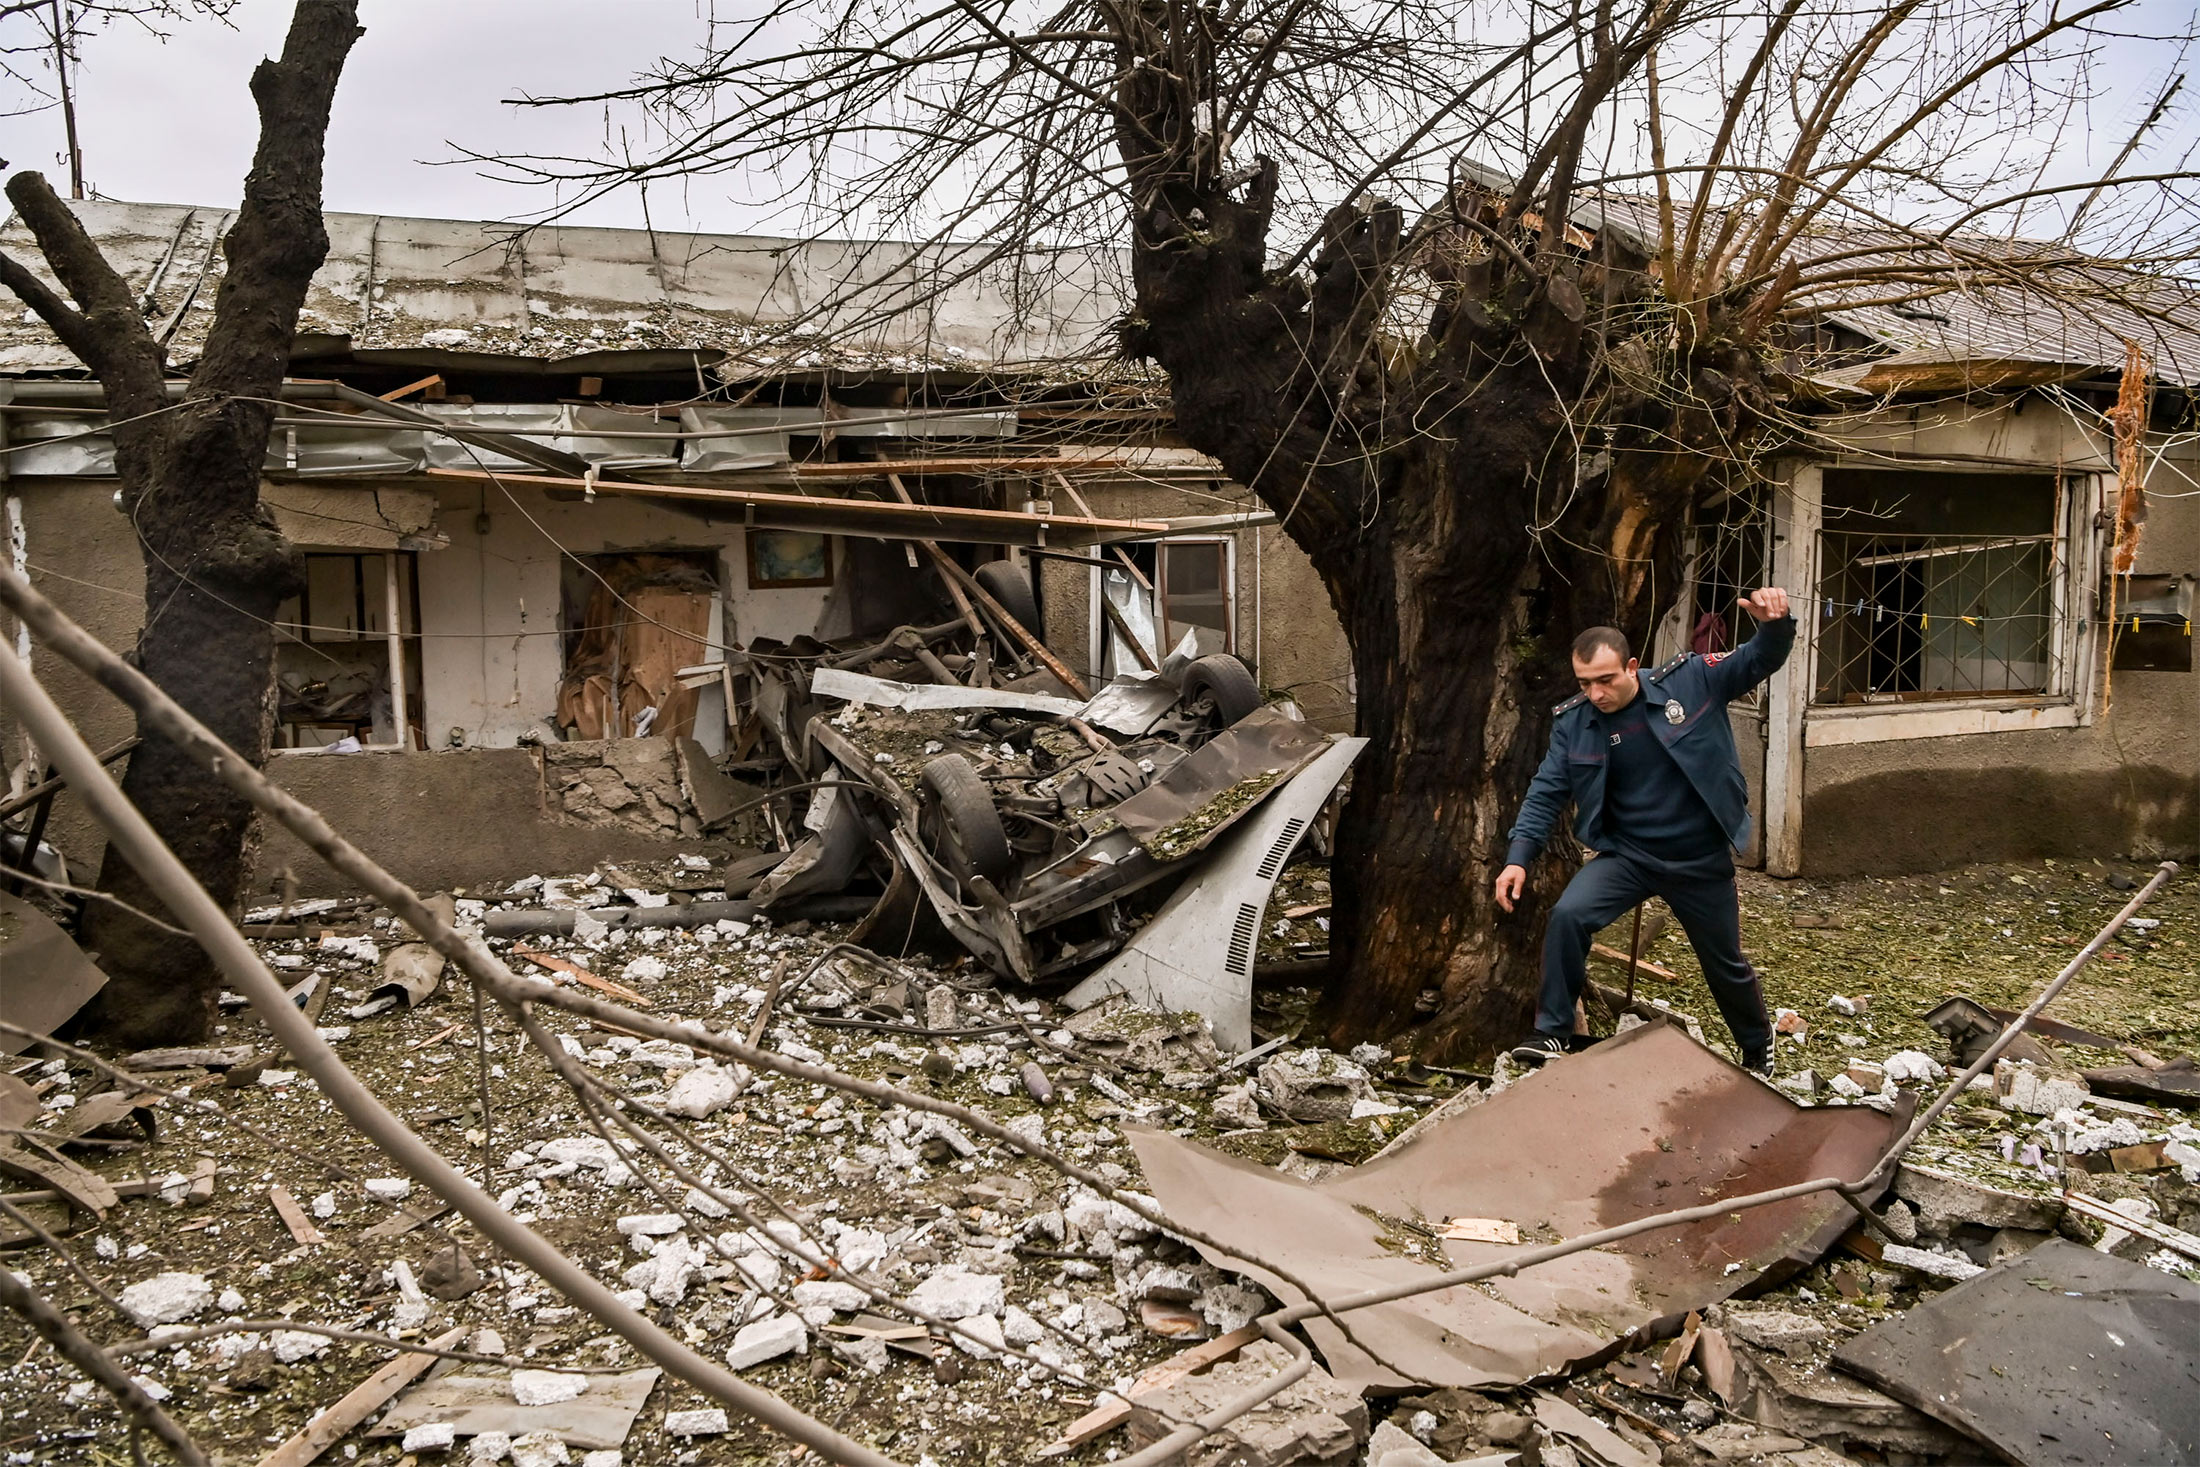 A police officer steps over debris in the yard of a destroyed house after shelling in the Nagorno-Karabakh region's main city of Stepanakert on Oct. 7.